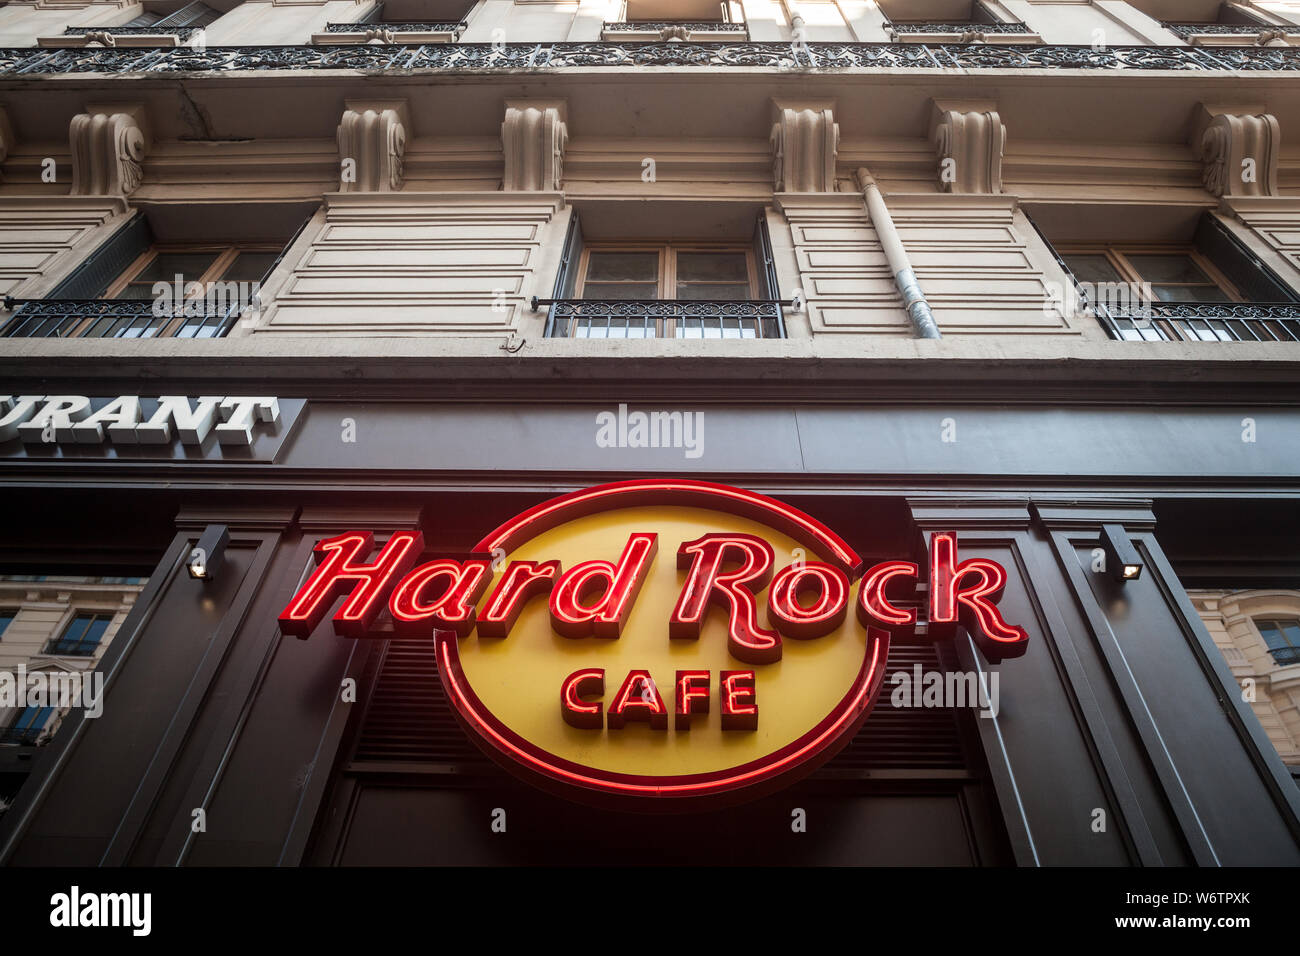 LYON, FRANCE - JULY 13, 2019: Hard Rock Cafe logo on their restaurant in Lyon. Hard Rock Cafe is a chain of American music theme restaurants spread wo Stock Photo